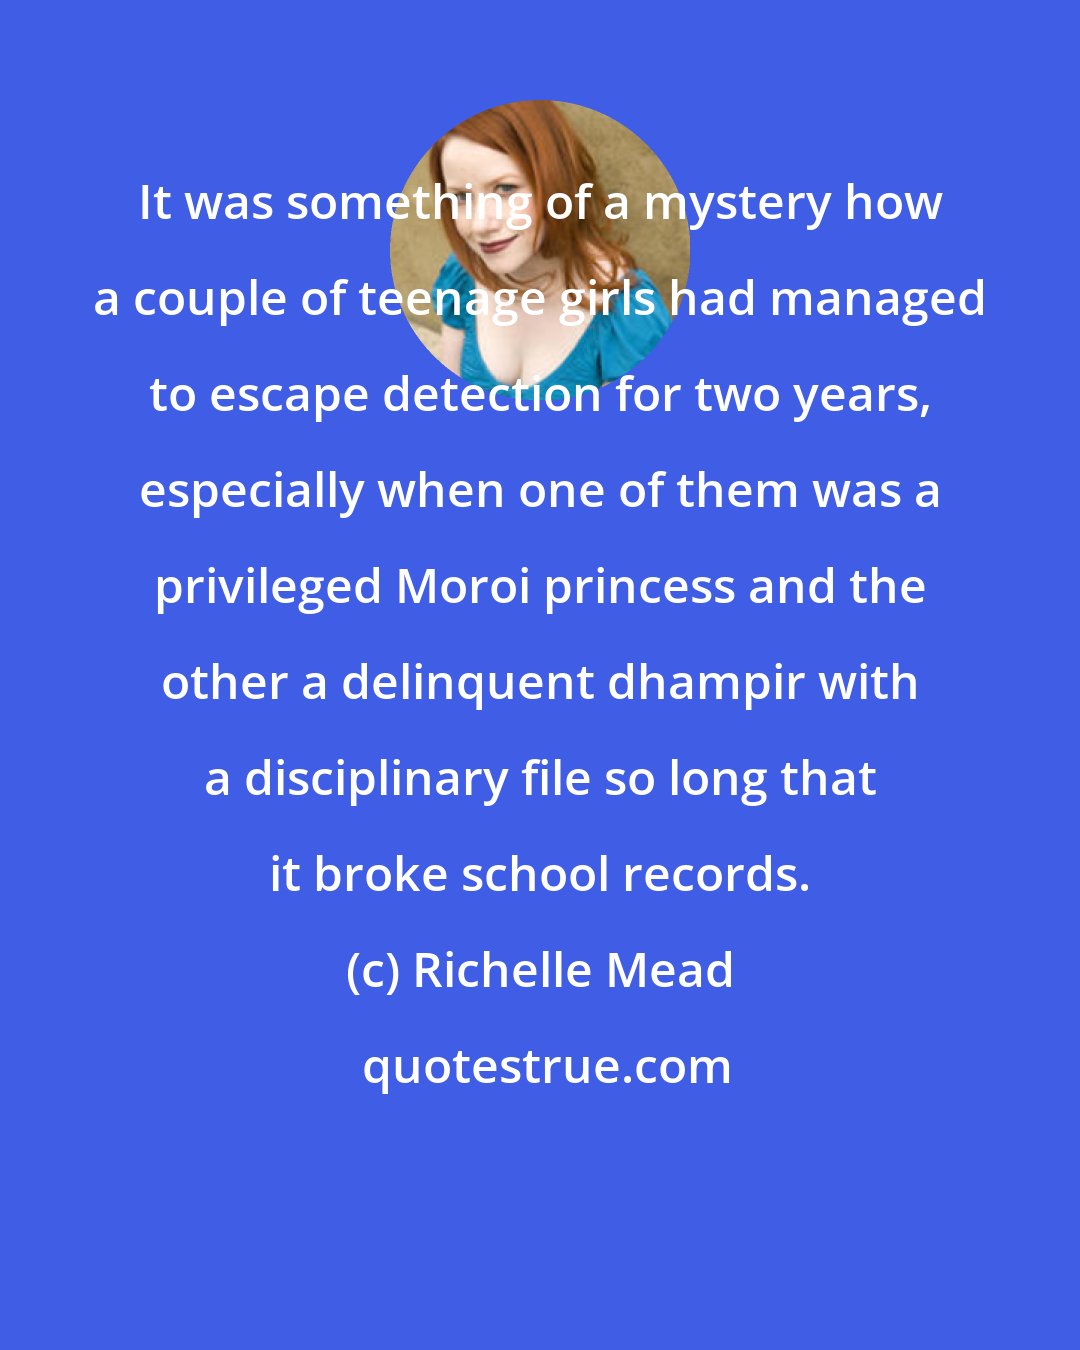 Richelle Mead: It was something of a mystery how a couple of teenage girls had managed to escape detection for two years, especially when one of them was a privileged Moroi princess and the other a delinquent dhampir with a disciplinary file so long that it broke school records.